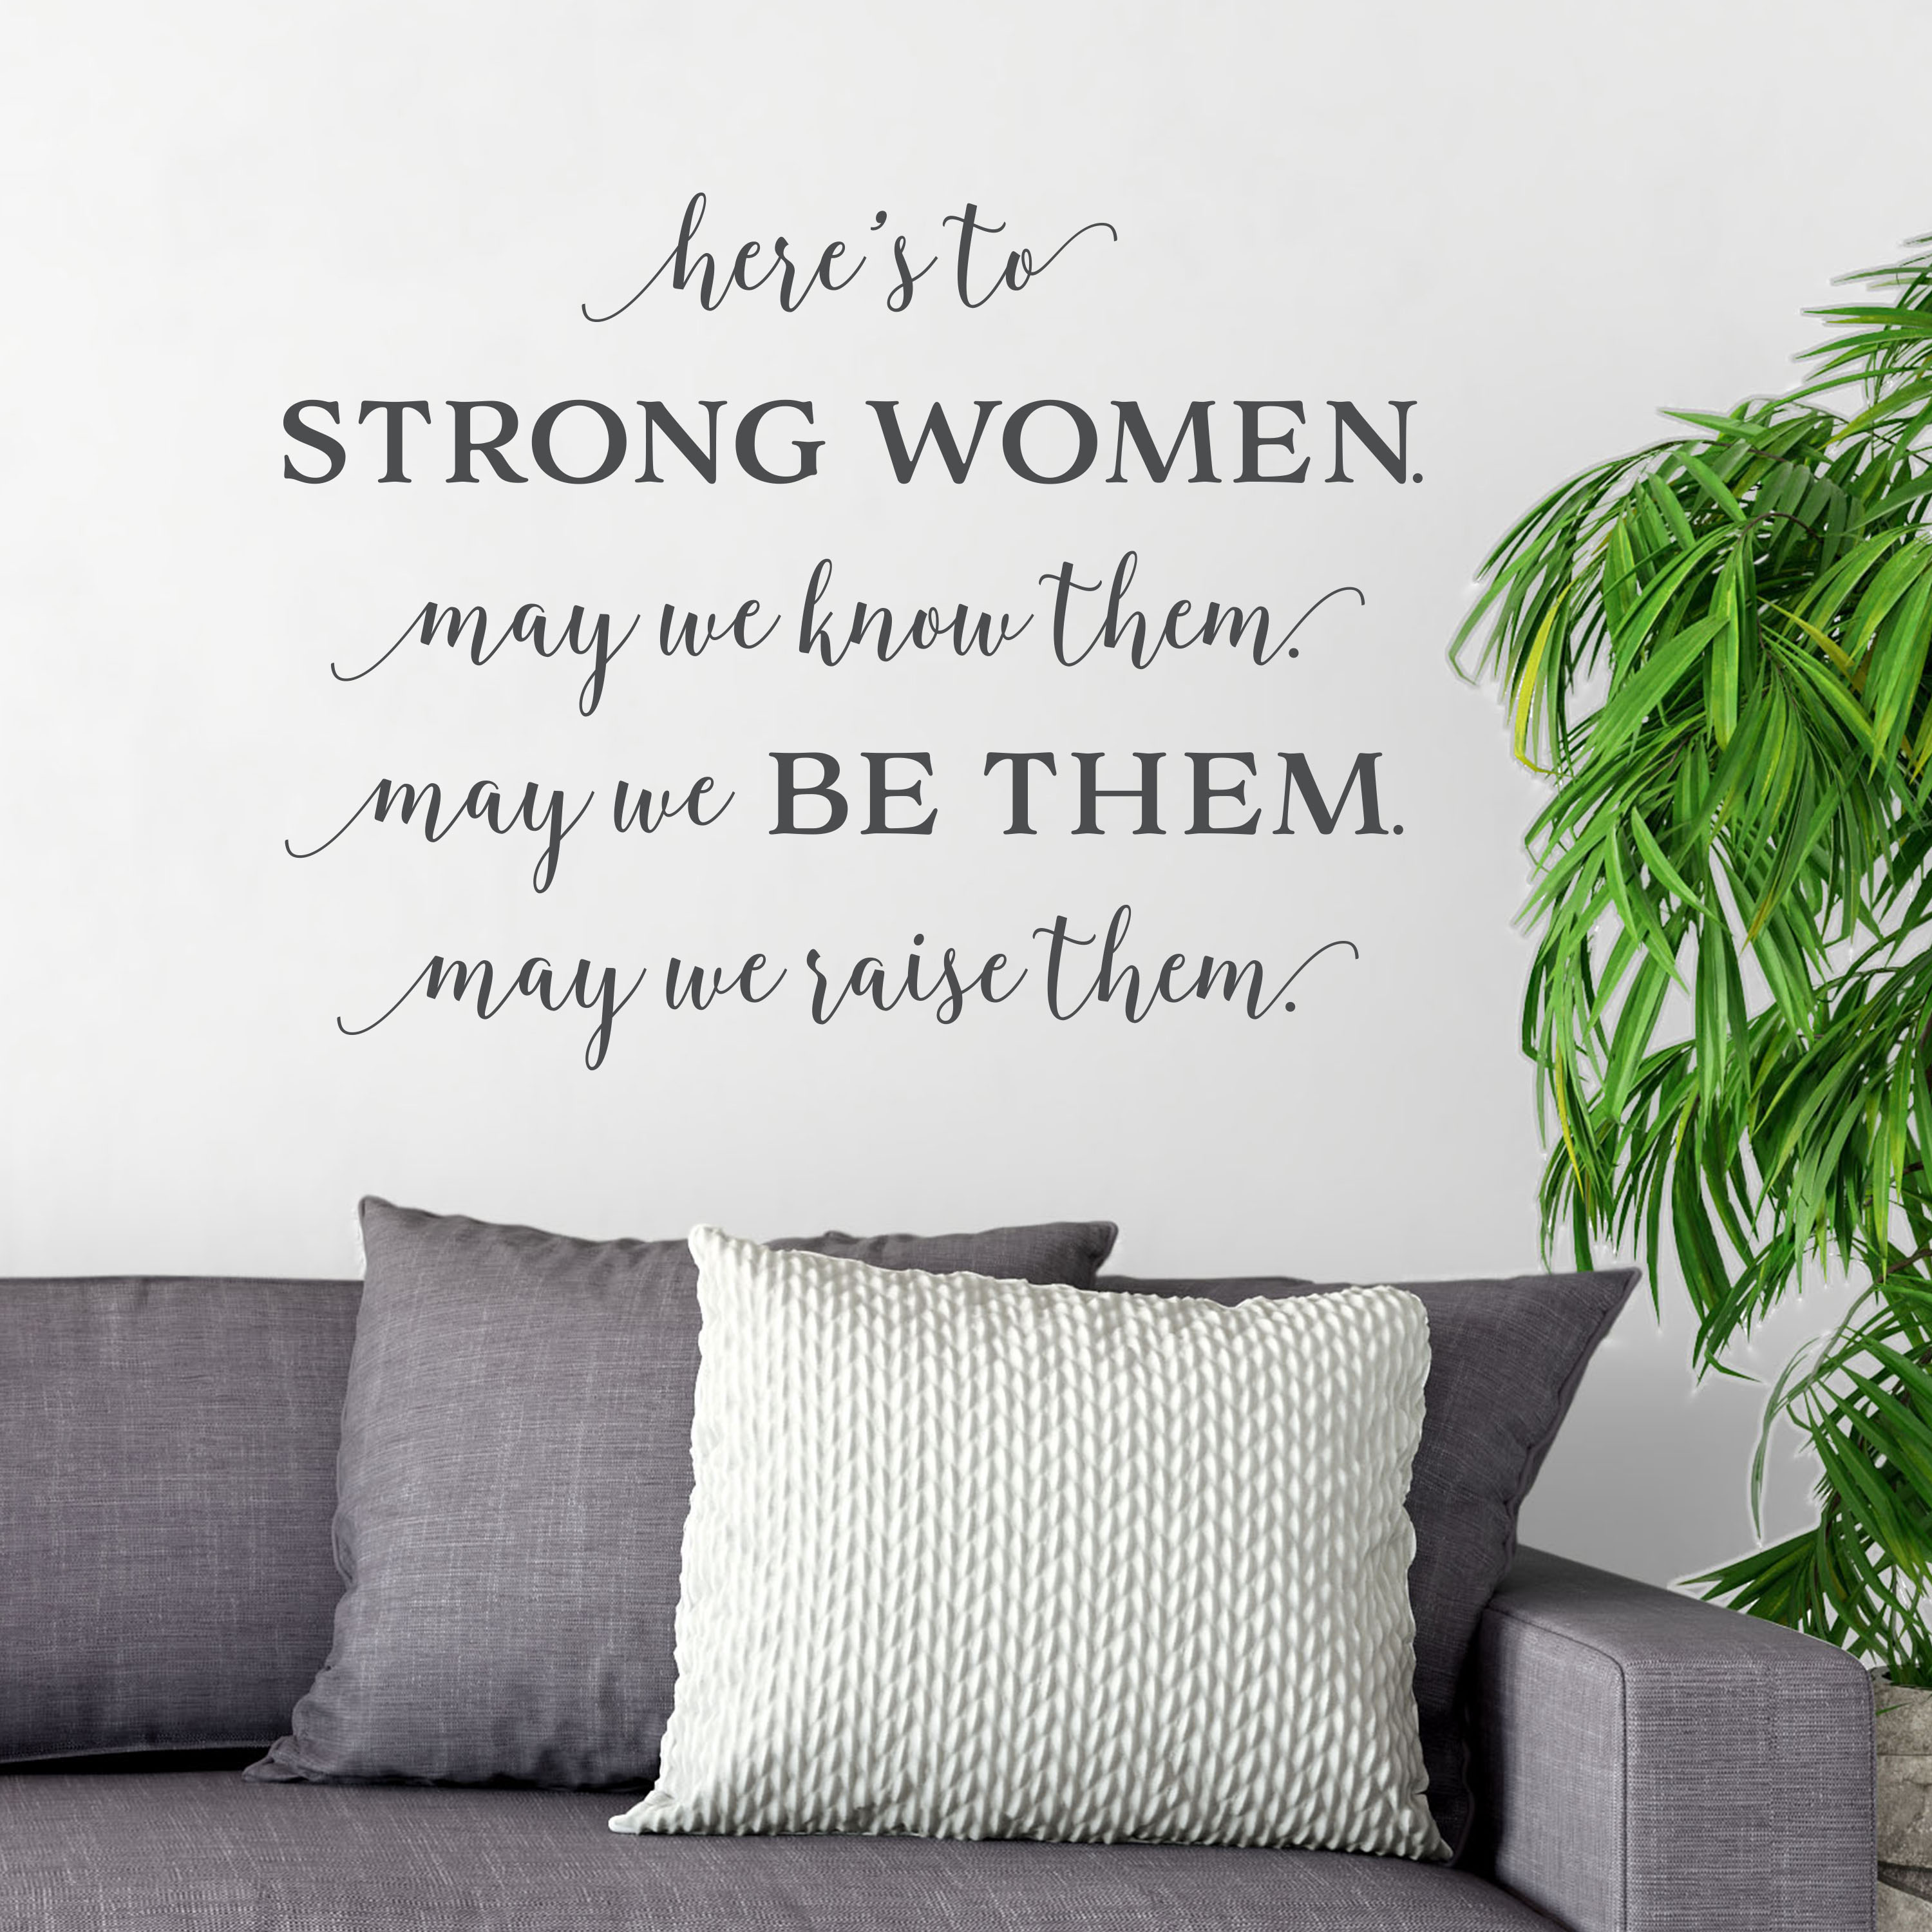 Inspirational/motivational womens quote and image  vinyl wall art stickers 